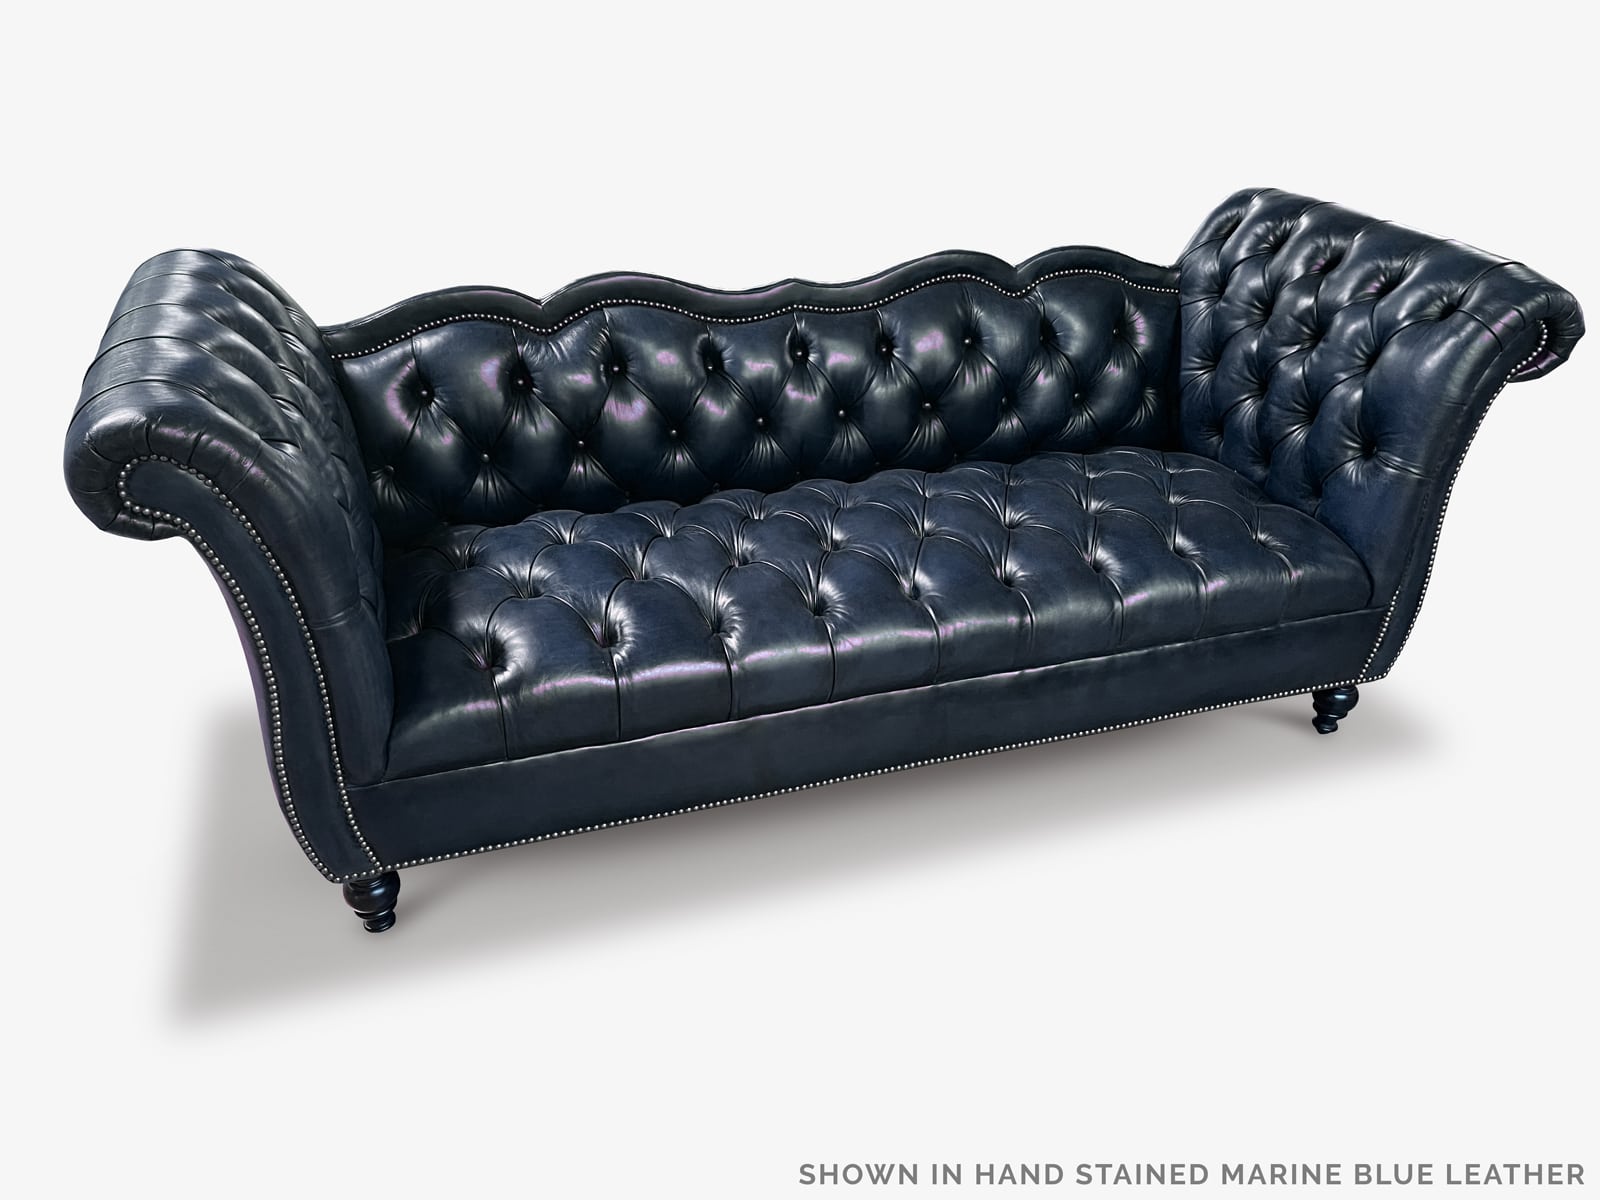 The Collins Custom Built Vintage Hand-Stained Marine Blue Chesterfield Sofa